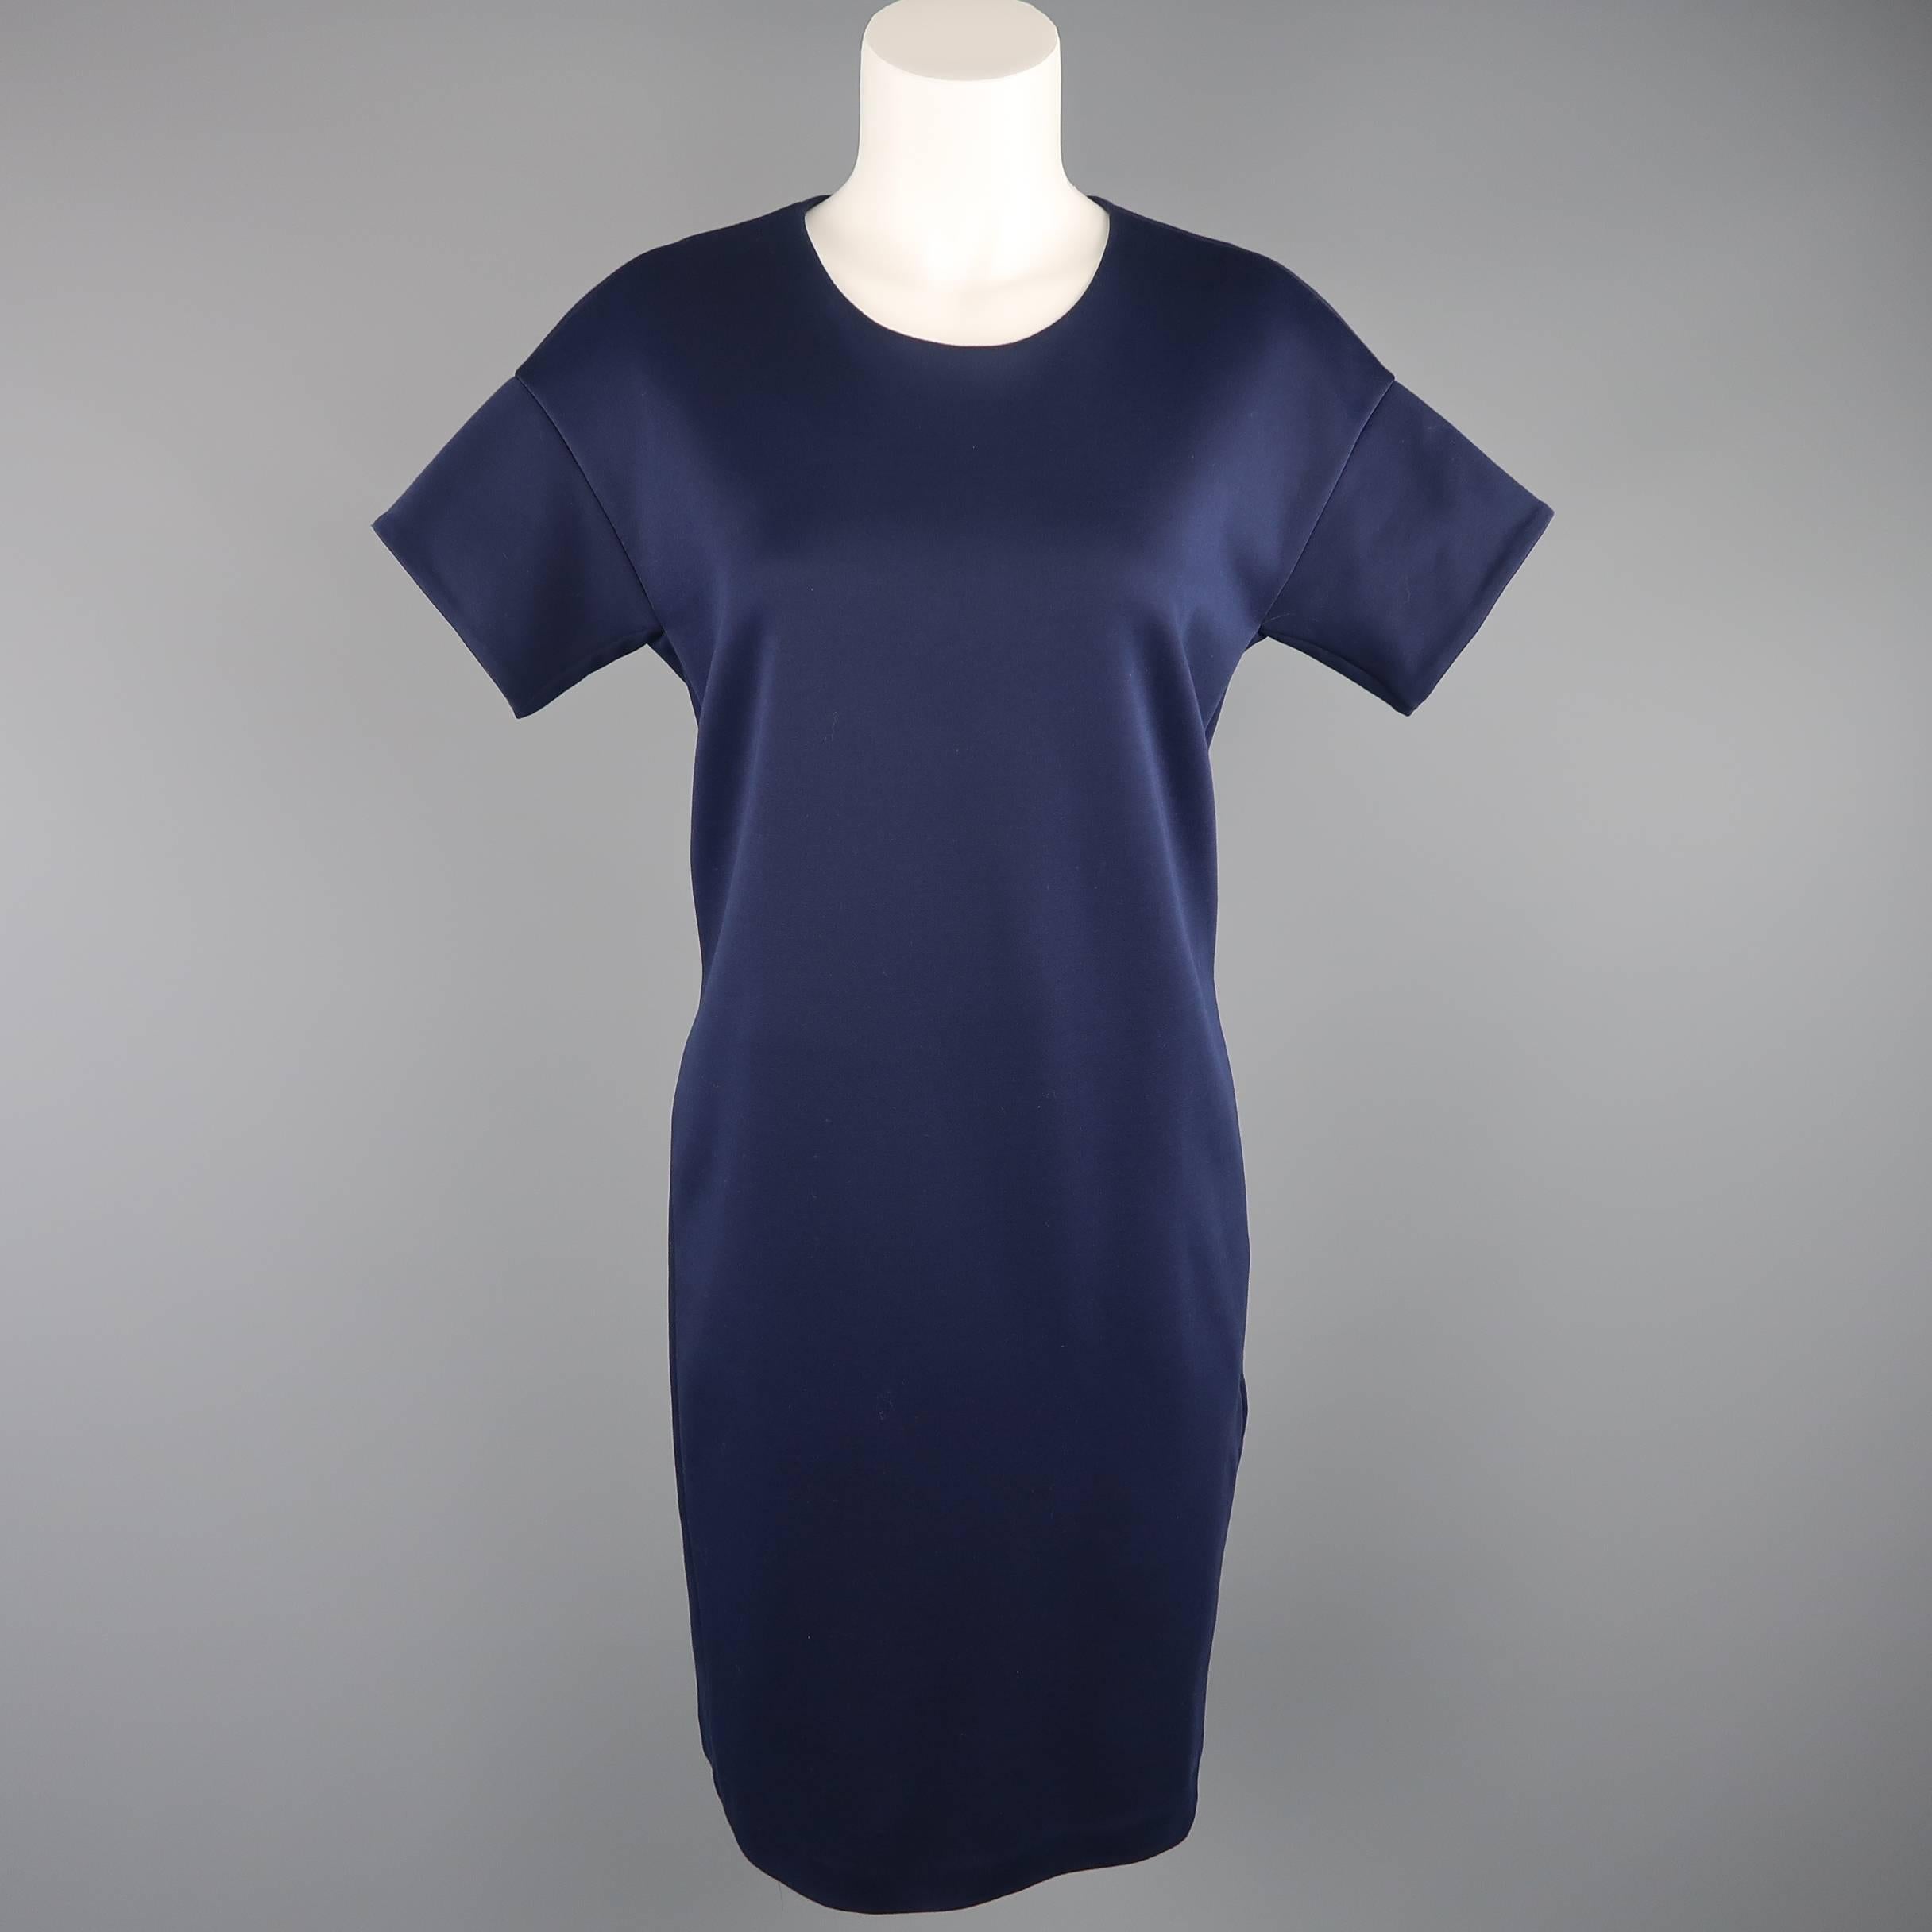 JIL SANDER shift dress comes in a structured jersey material with a round neck, short drop shoulder sleeves, sack silhouette and fabric belt. Made in Italy.
 
Excellent Pre-Owned Condition.
Marked: (no size)
 
Measurements:
 
Shoulder: 20 in.
Bust: